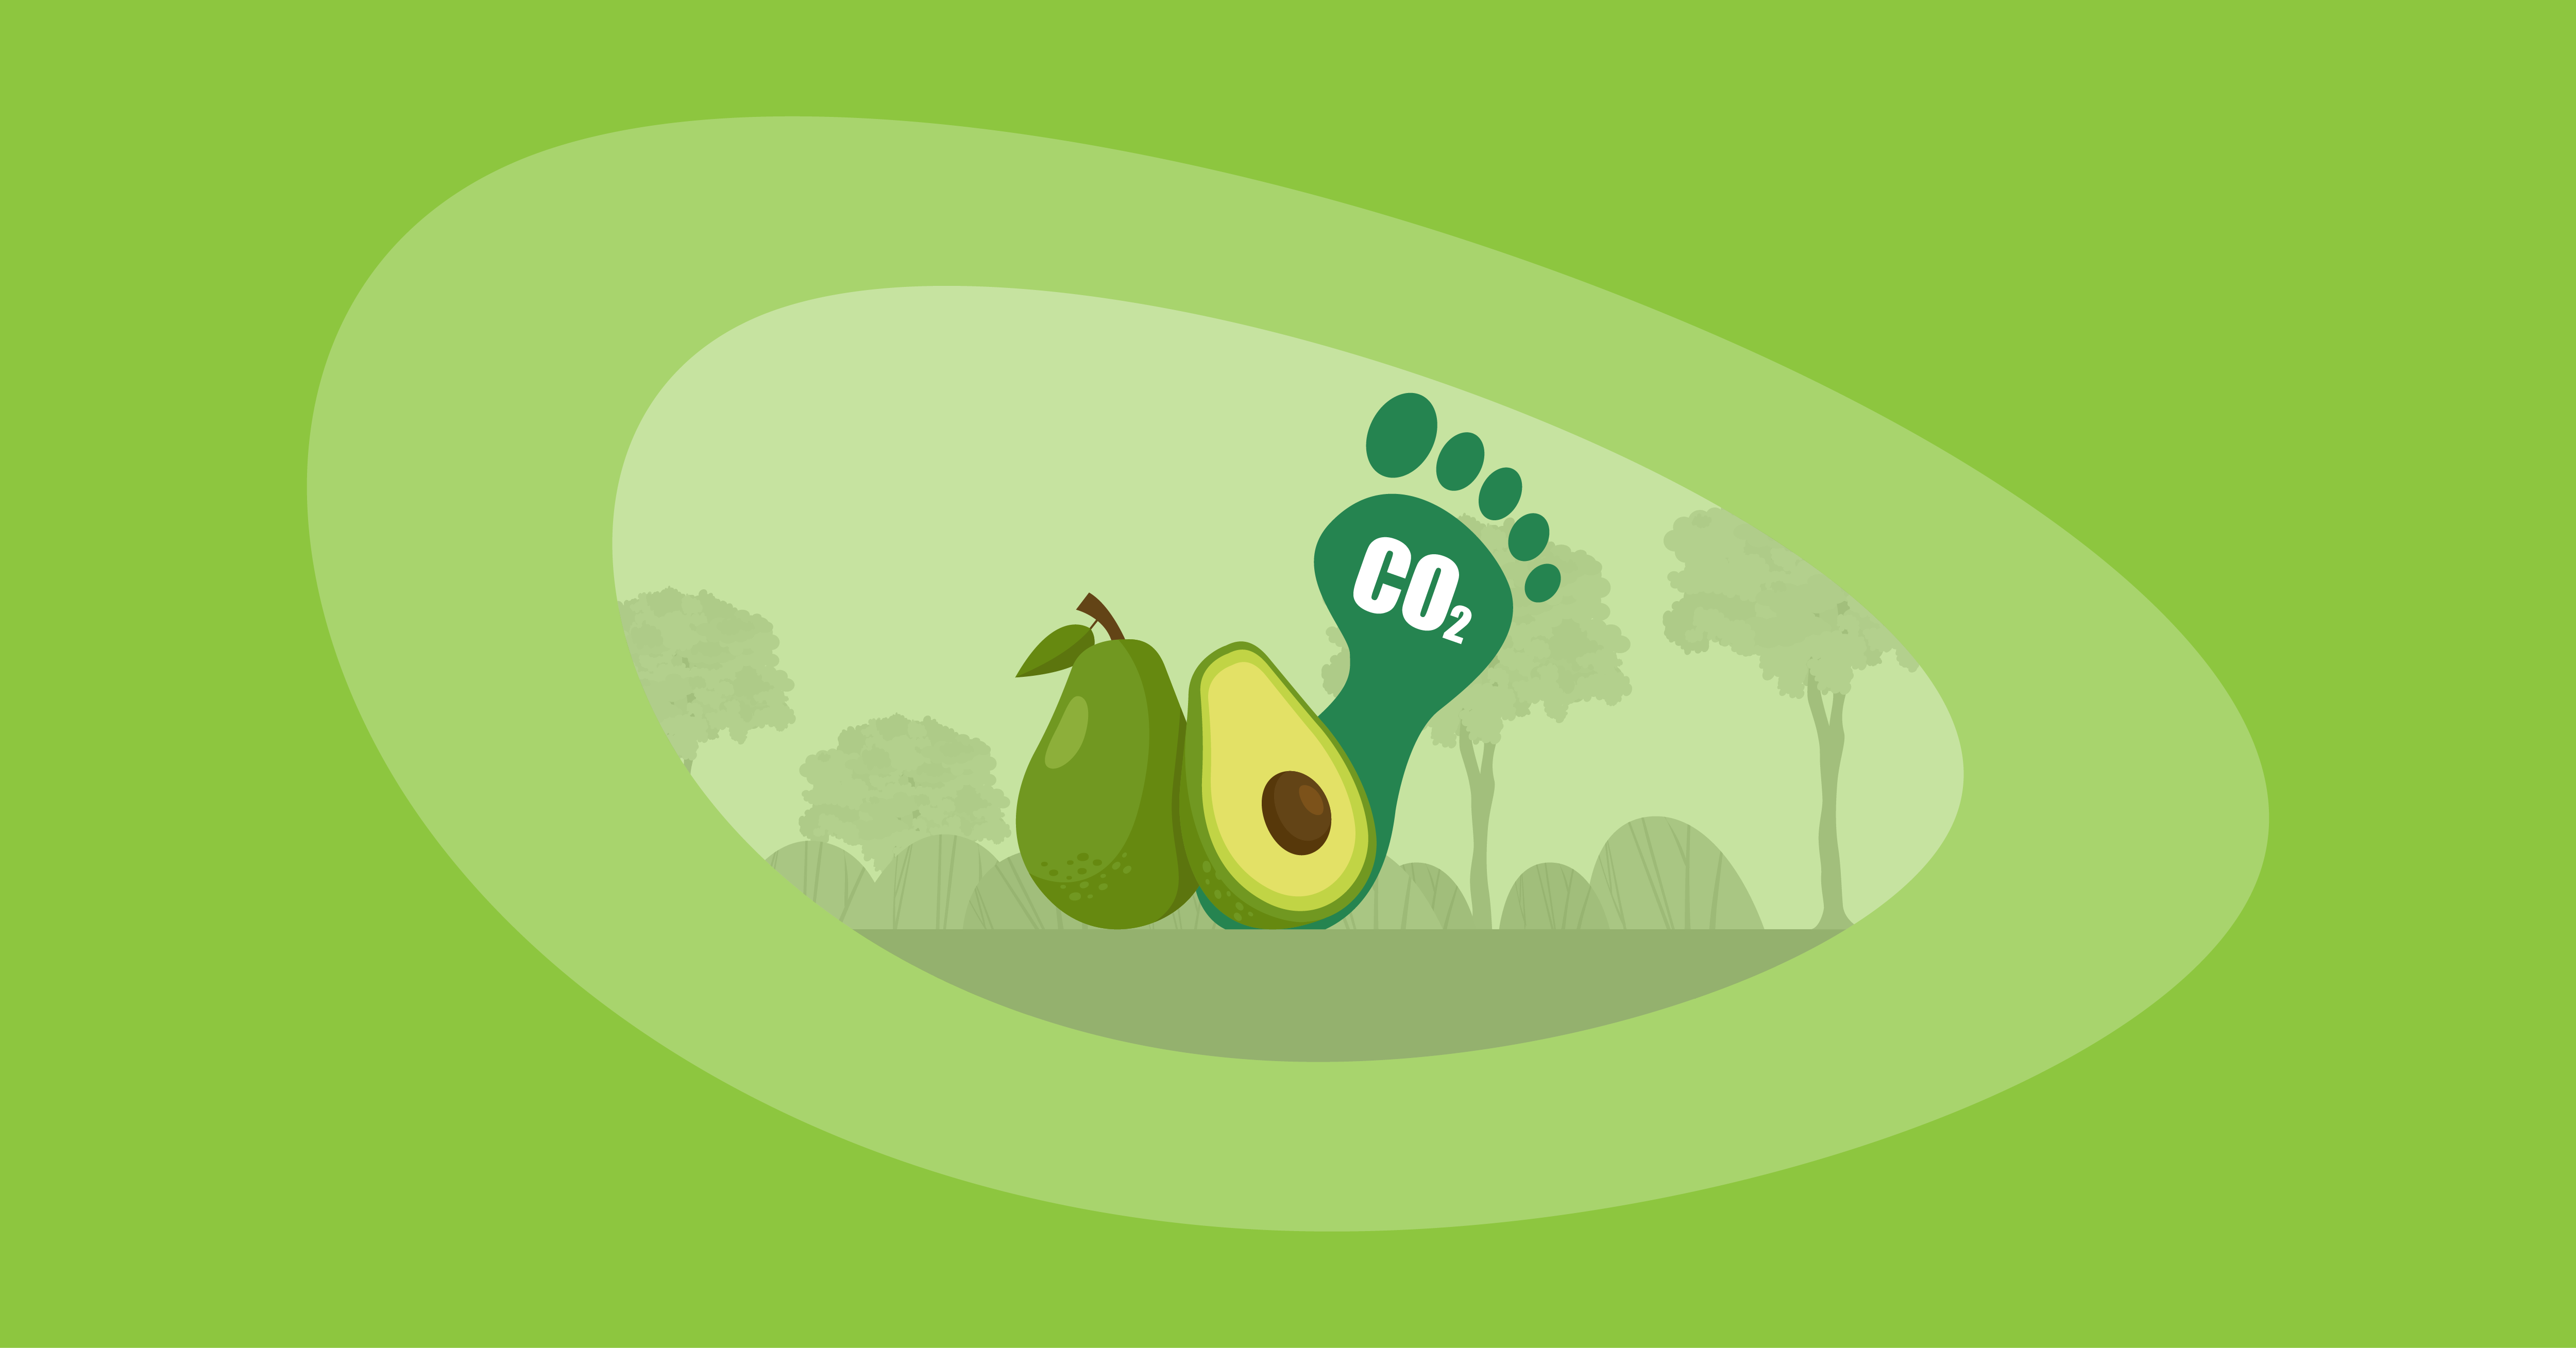 Attempted illustration of an avocado with its carbon footprint